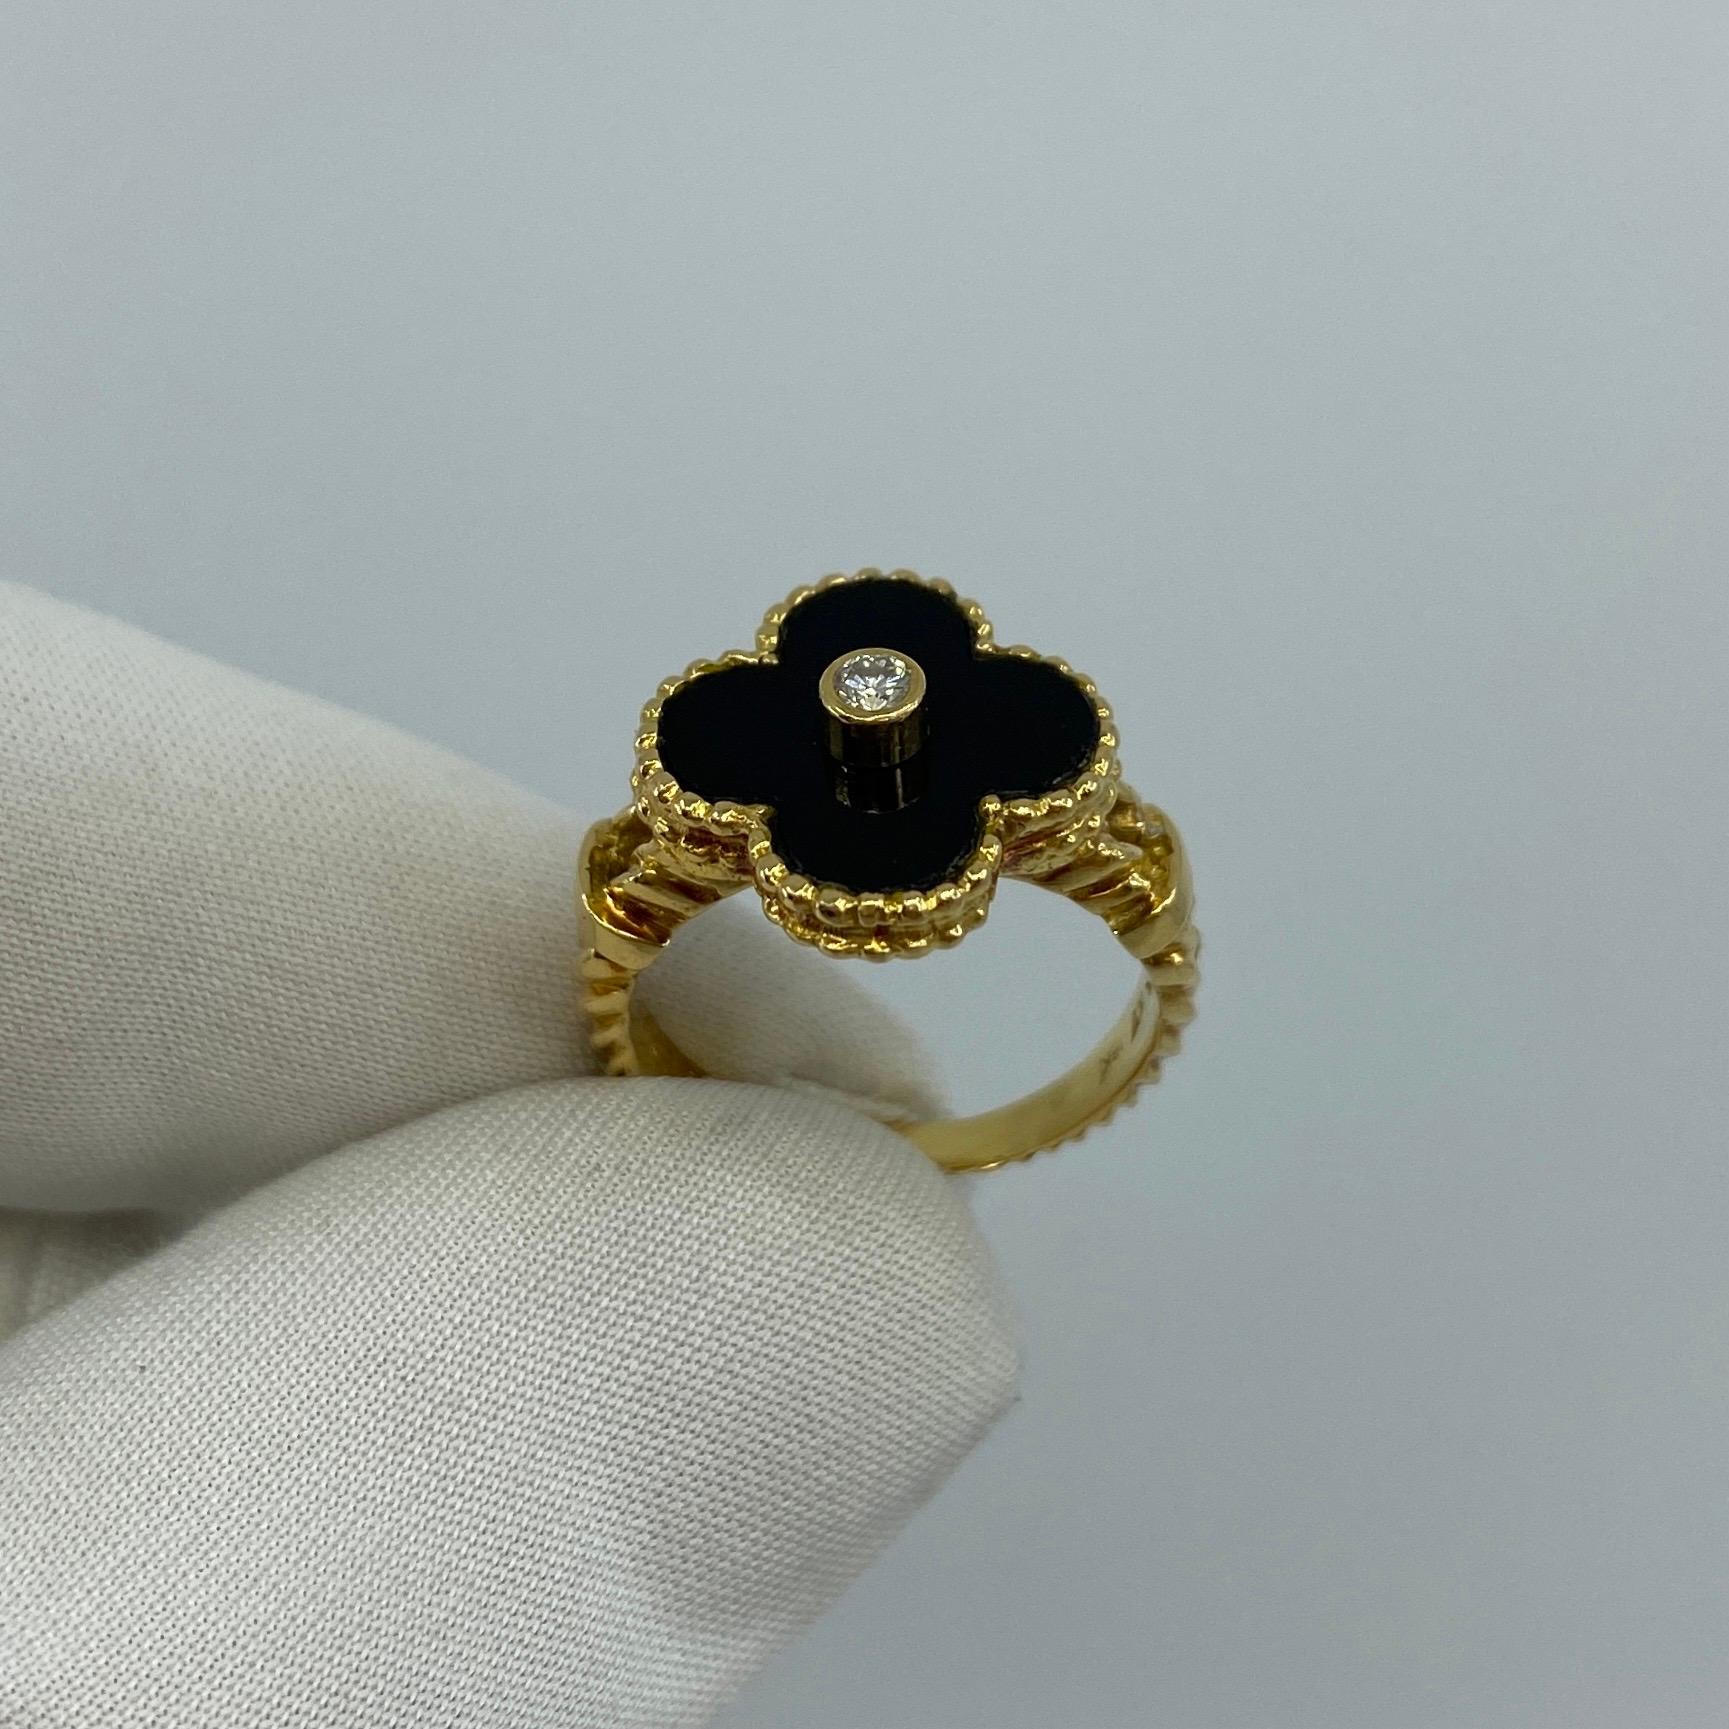 Vintage Van Cleef & Arpels Alhambra Onyx & Diamond 18 Karat Yellow Gold Ring.

A stunning vintage ring with the classic Alhambra design by fine French jewellery house Van Cleef & Arpels. Set with a 0.05ct VVS diamond E/F colour on top of an onyx